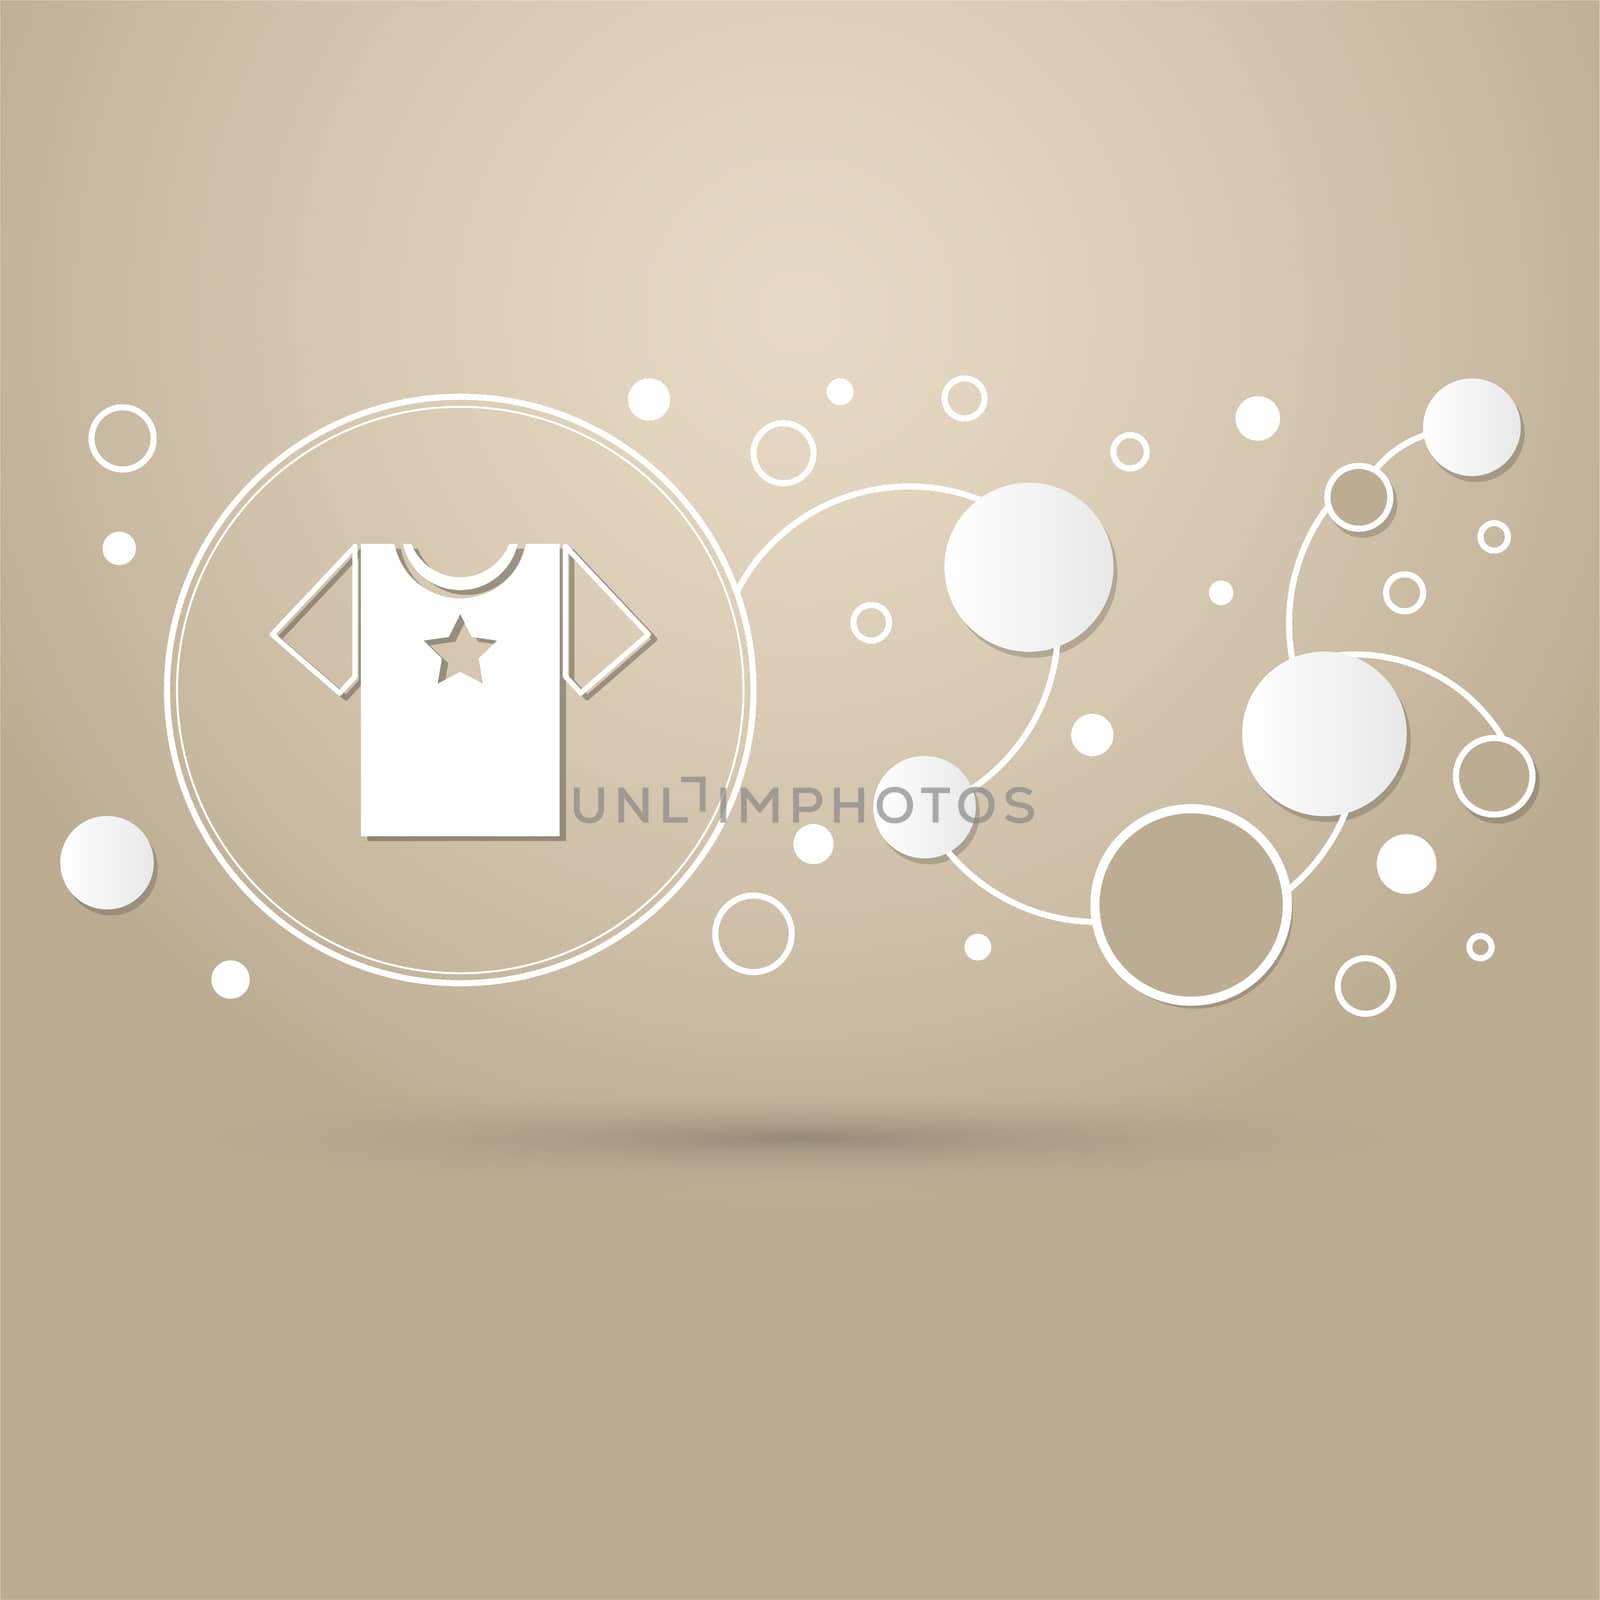 t-shirt icon on a brown background with elegant style and modern design infographic.  by Adamchuk